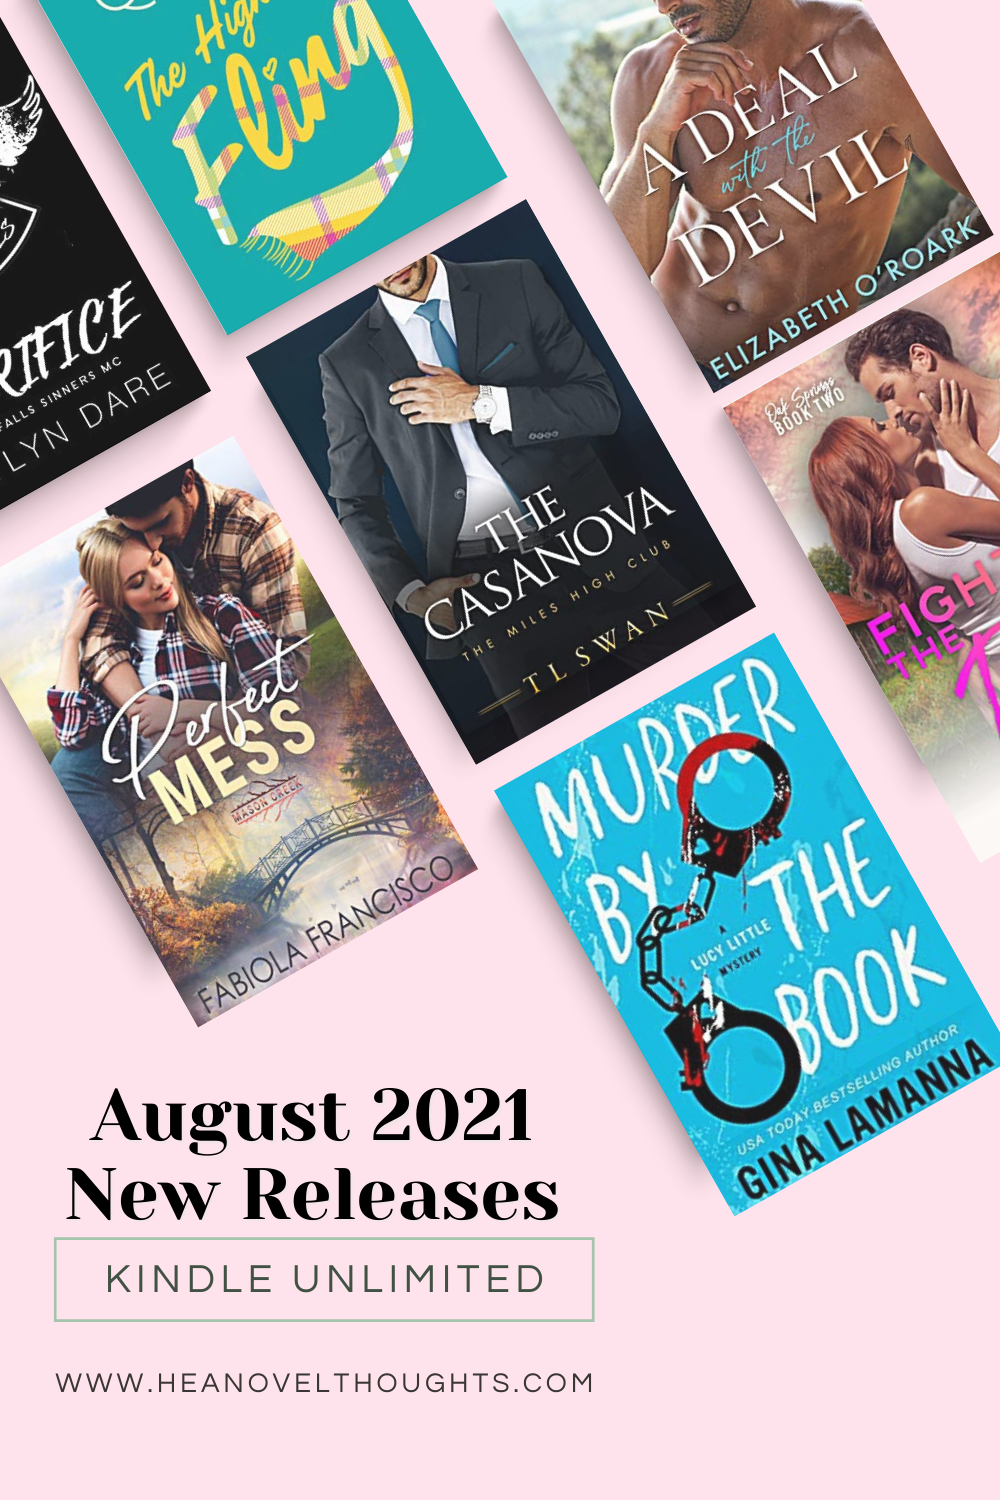 August 2021 New Book Releases in Kindle Unlimited